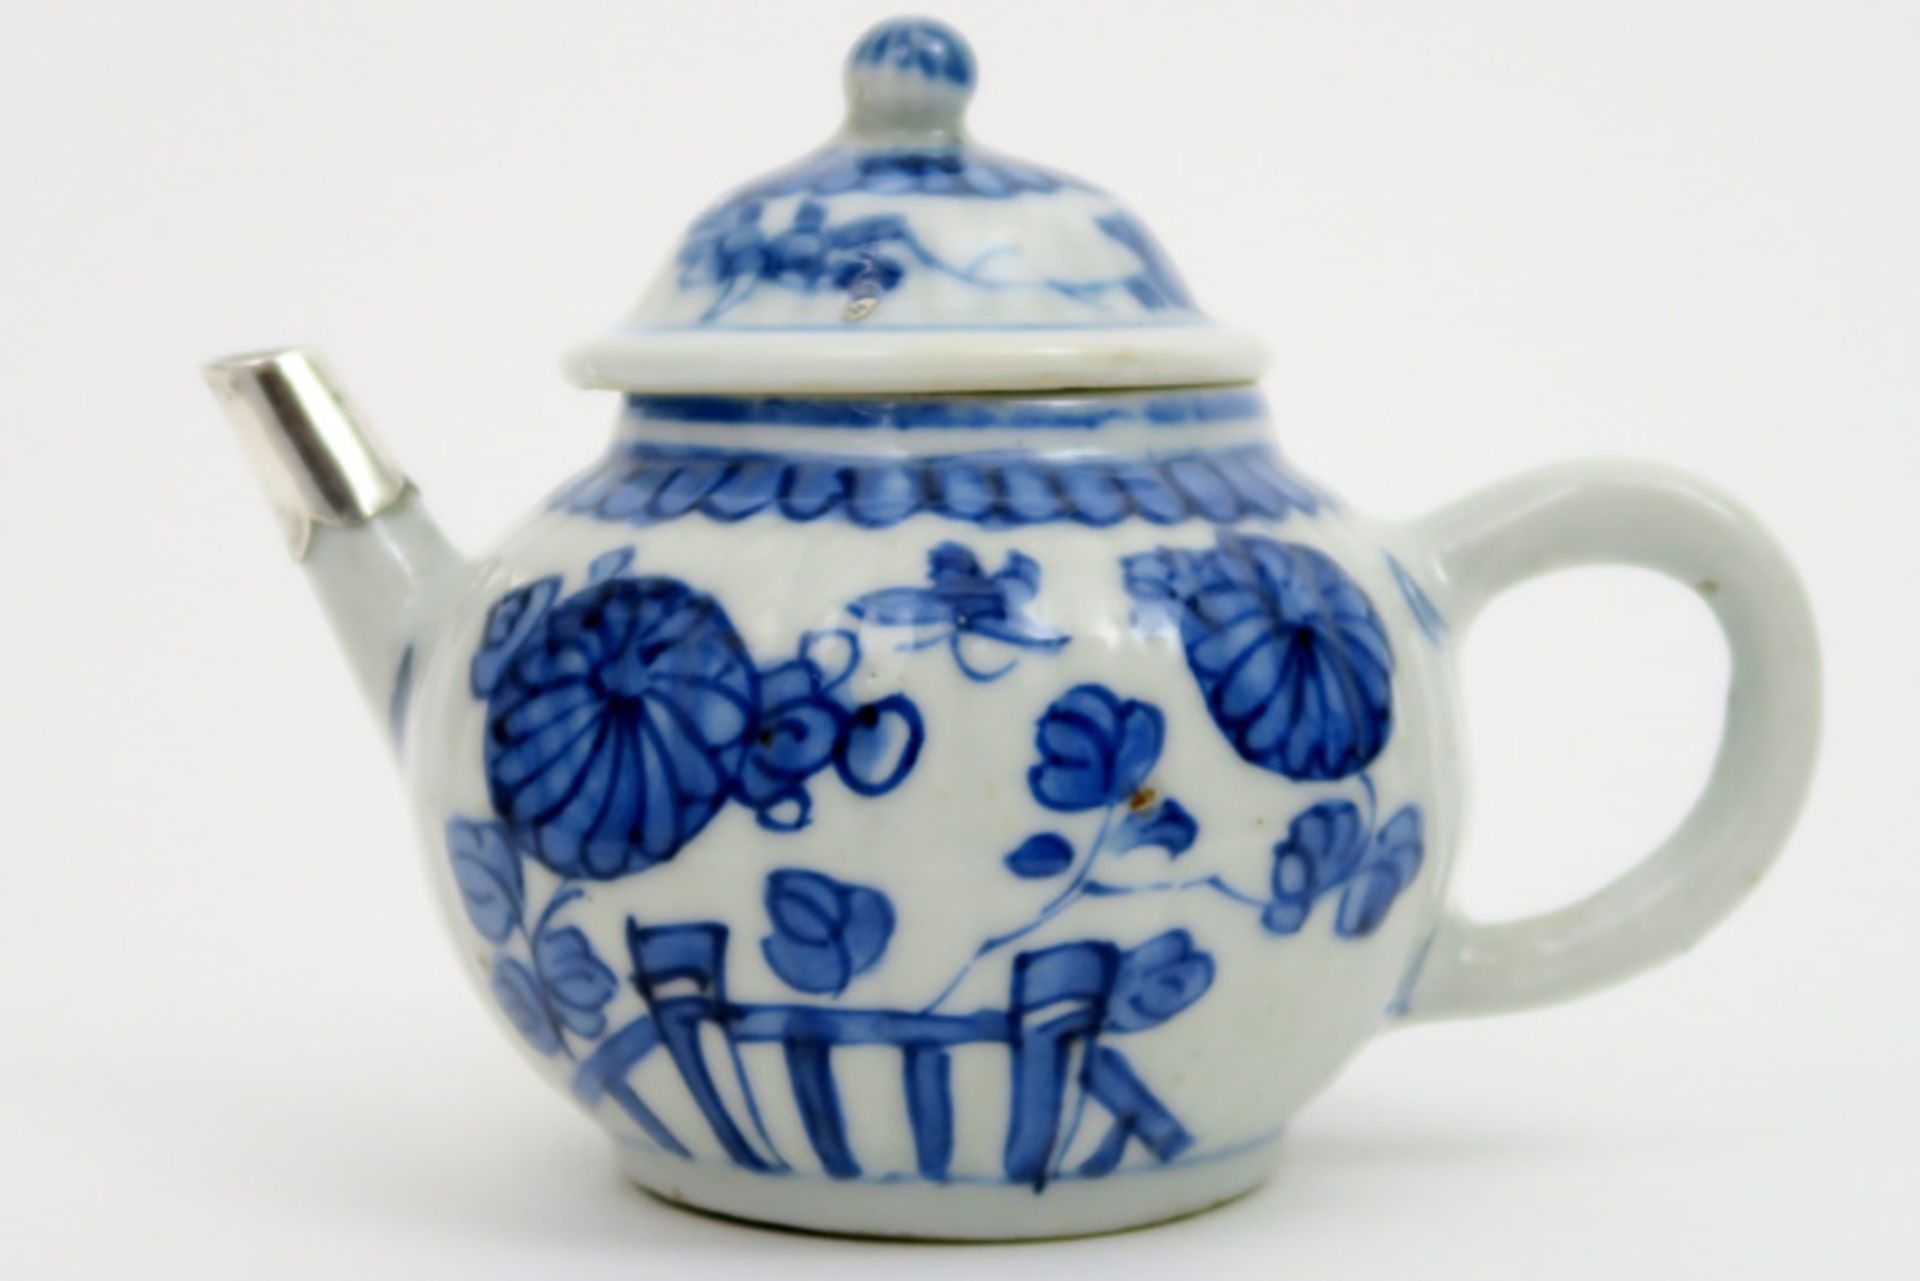 18th Cent. Kang Xi tea pot in porcelain with blue-white flower and butterfly decor and with silver - Image 2 of 4